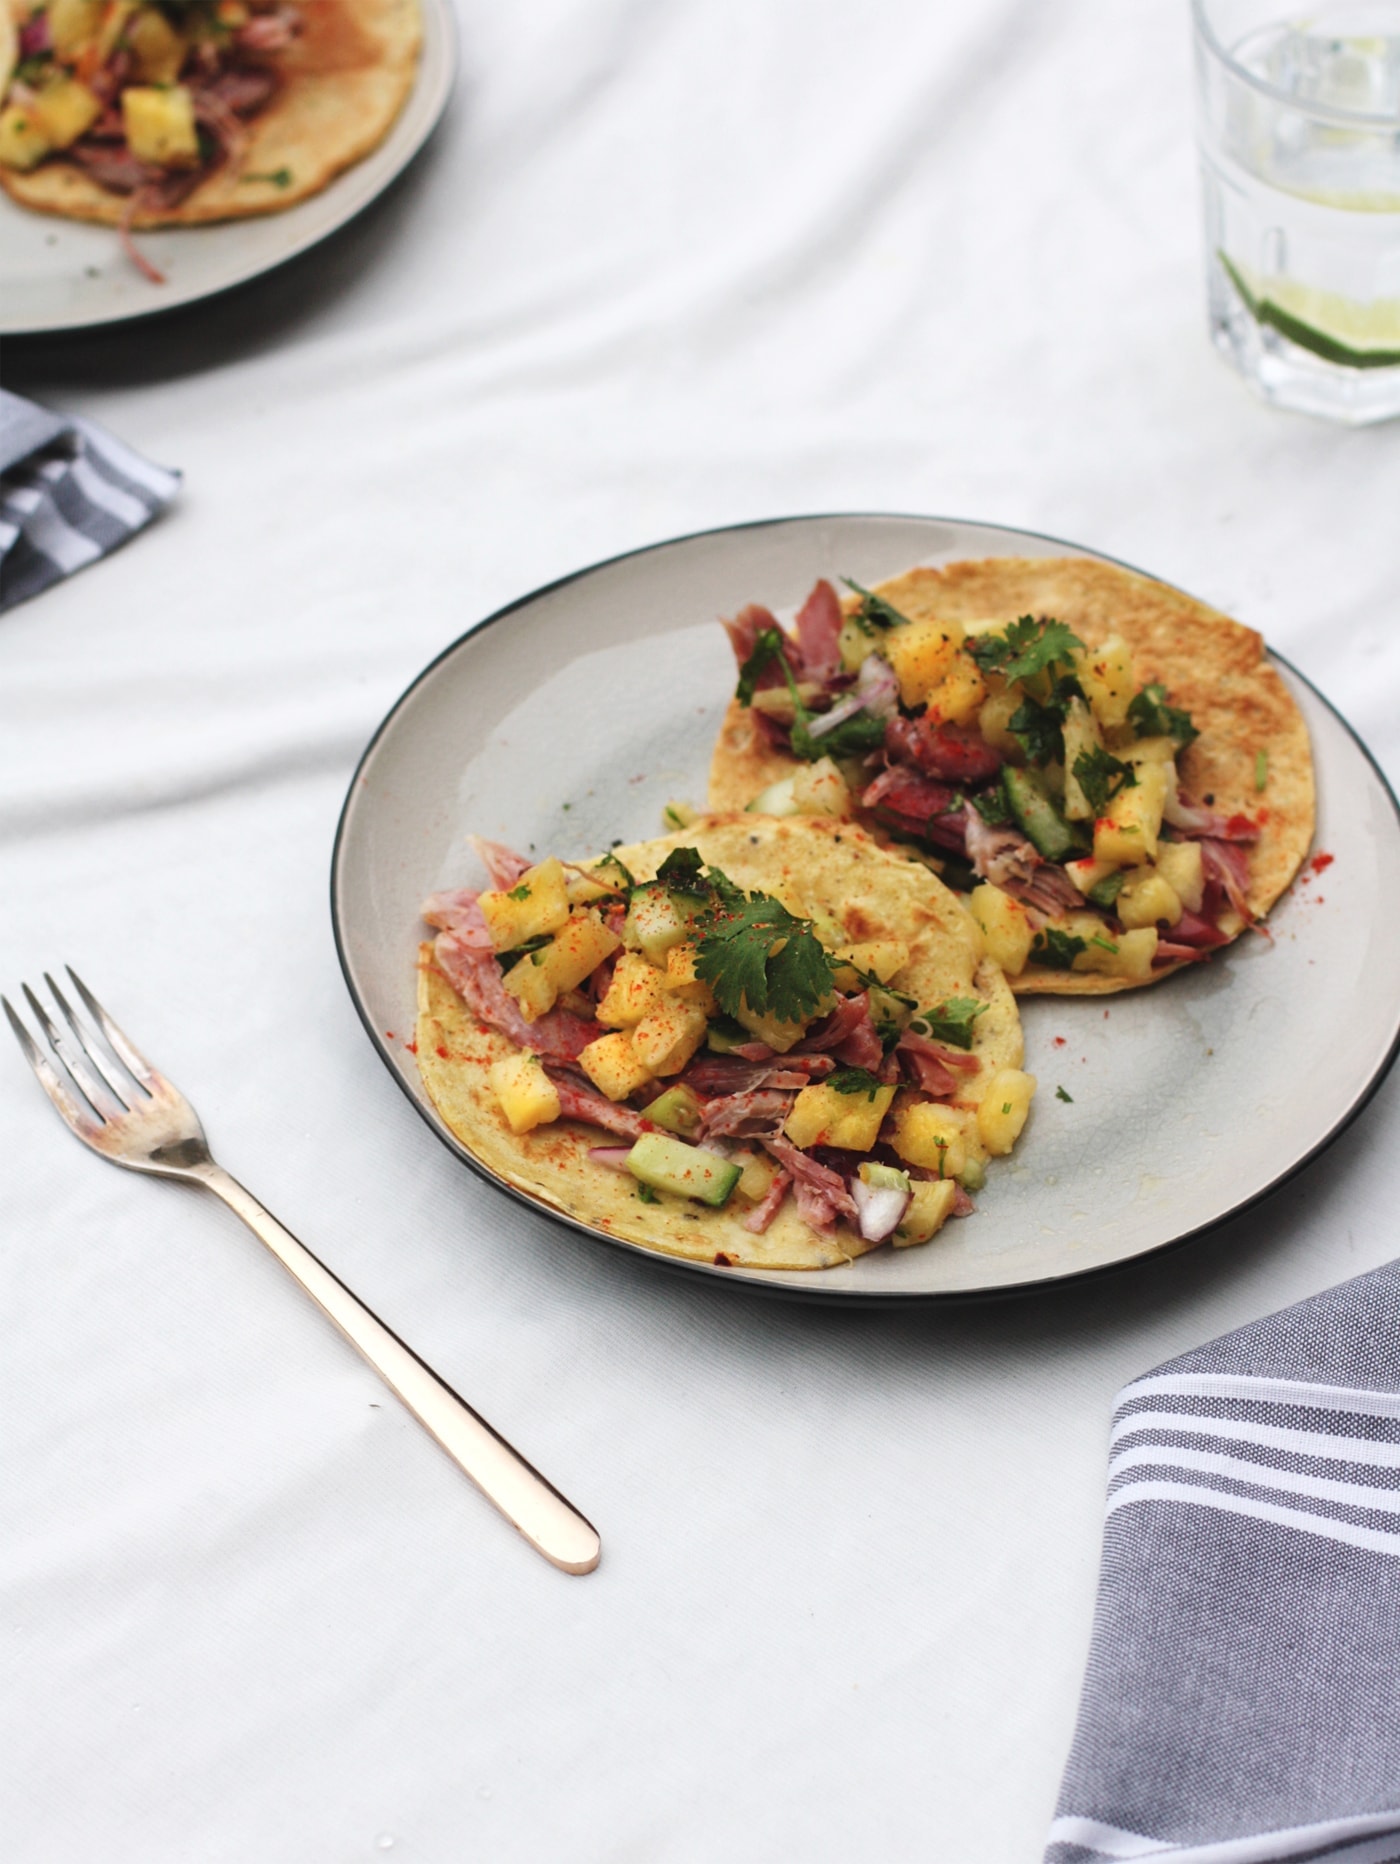 Paleo ham tacos with pineapple salsa | gluten free | grain free | dairy free | perfect for a summer evening